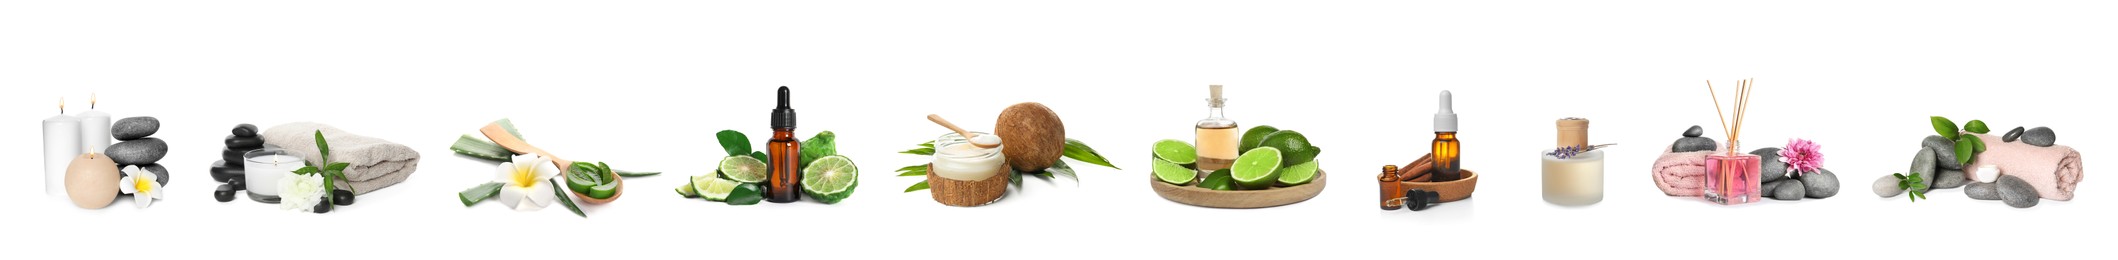 Set with different spa products isolated on white